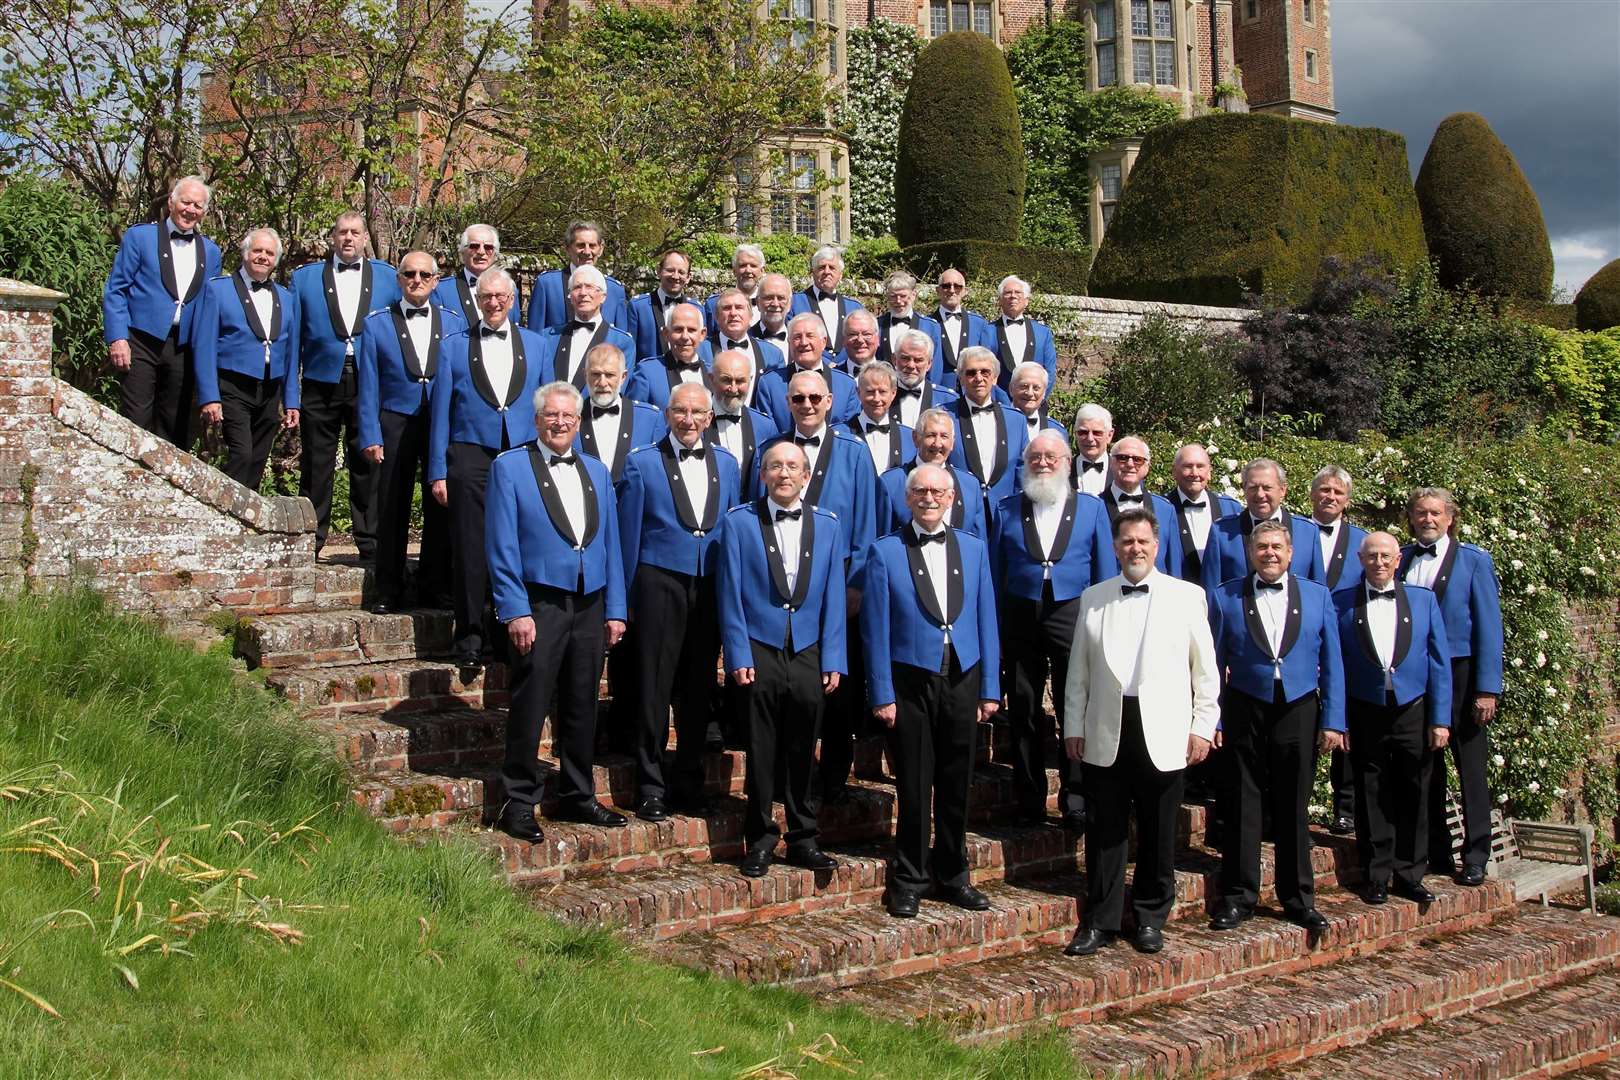 The Kent Police Male Voice Choir has been performing since 1978